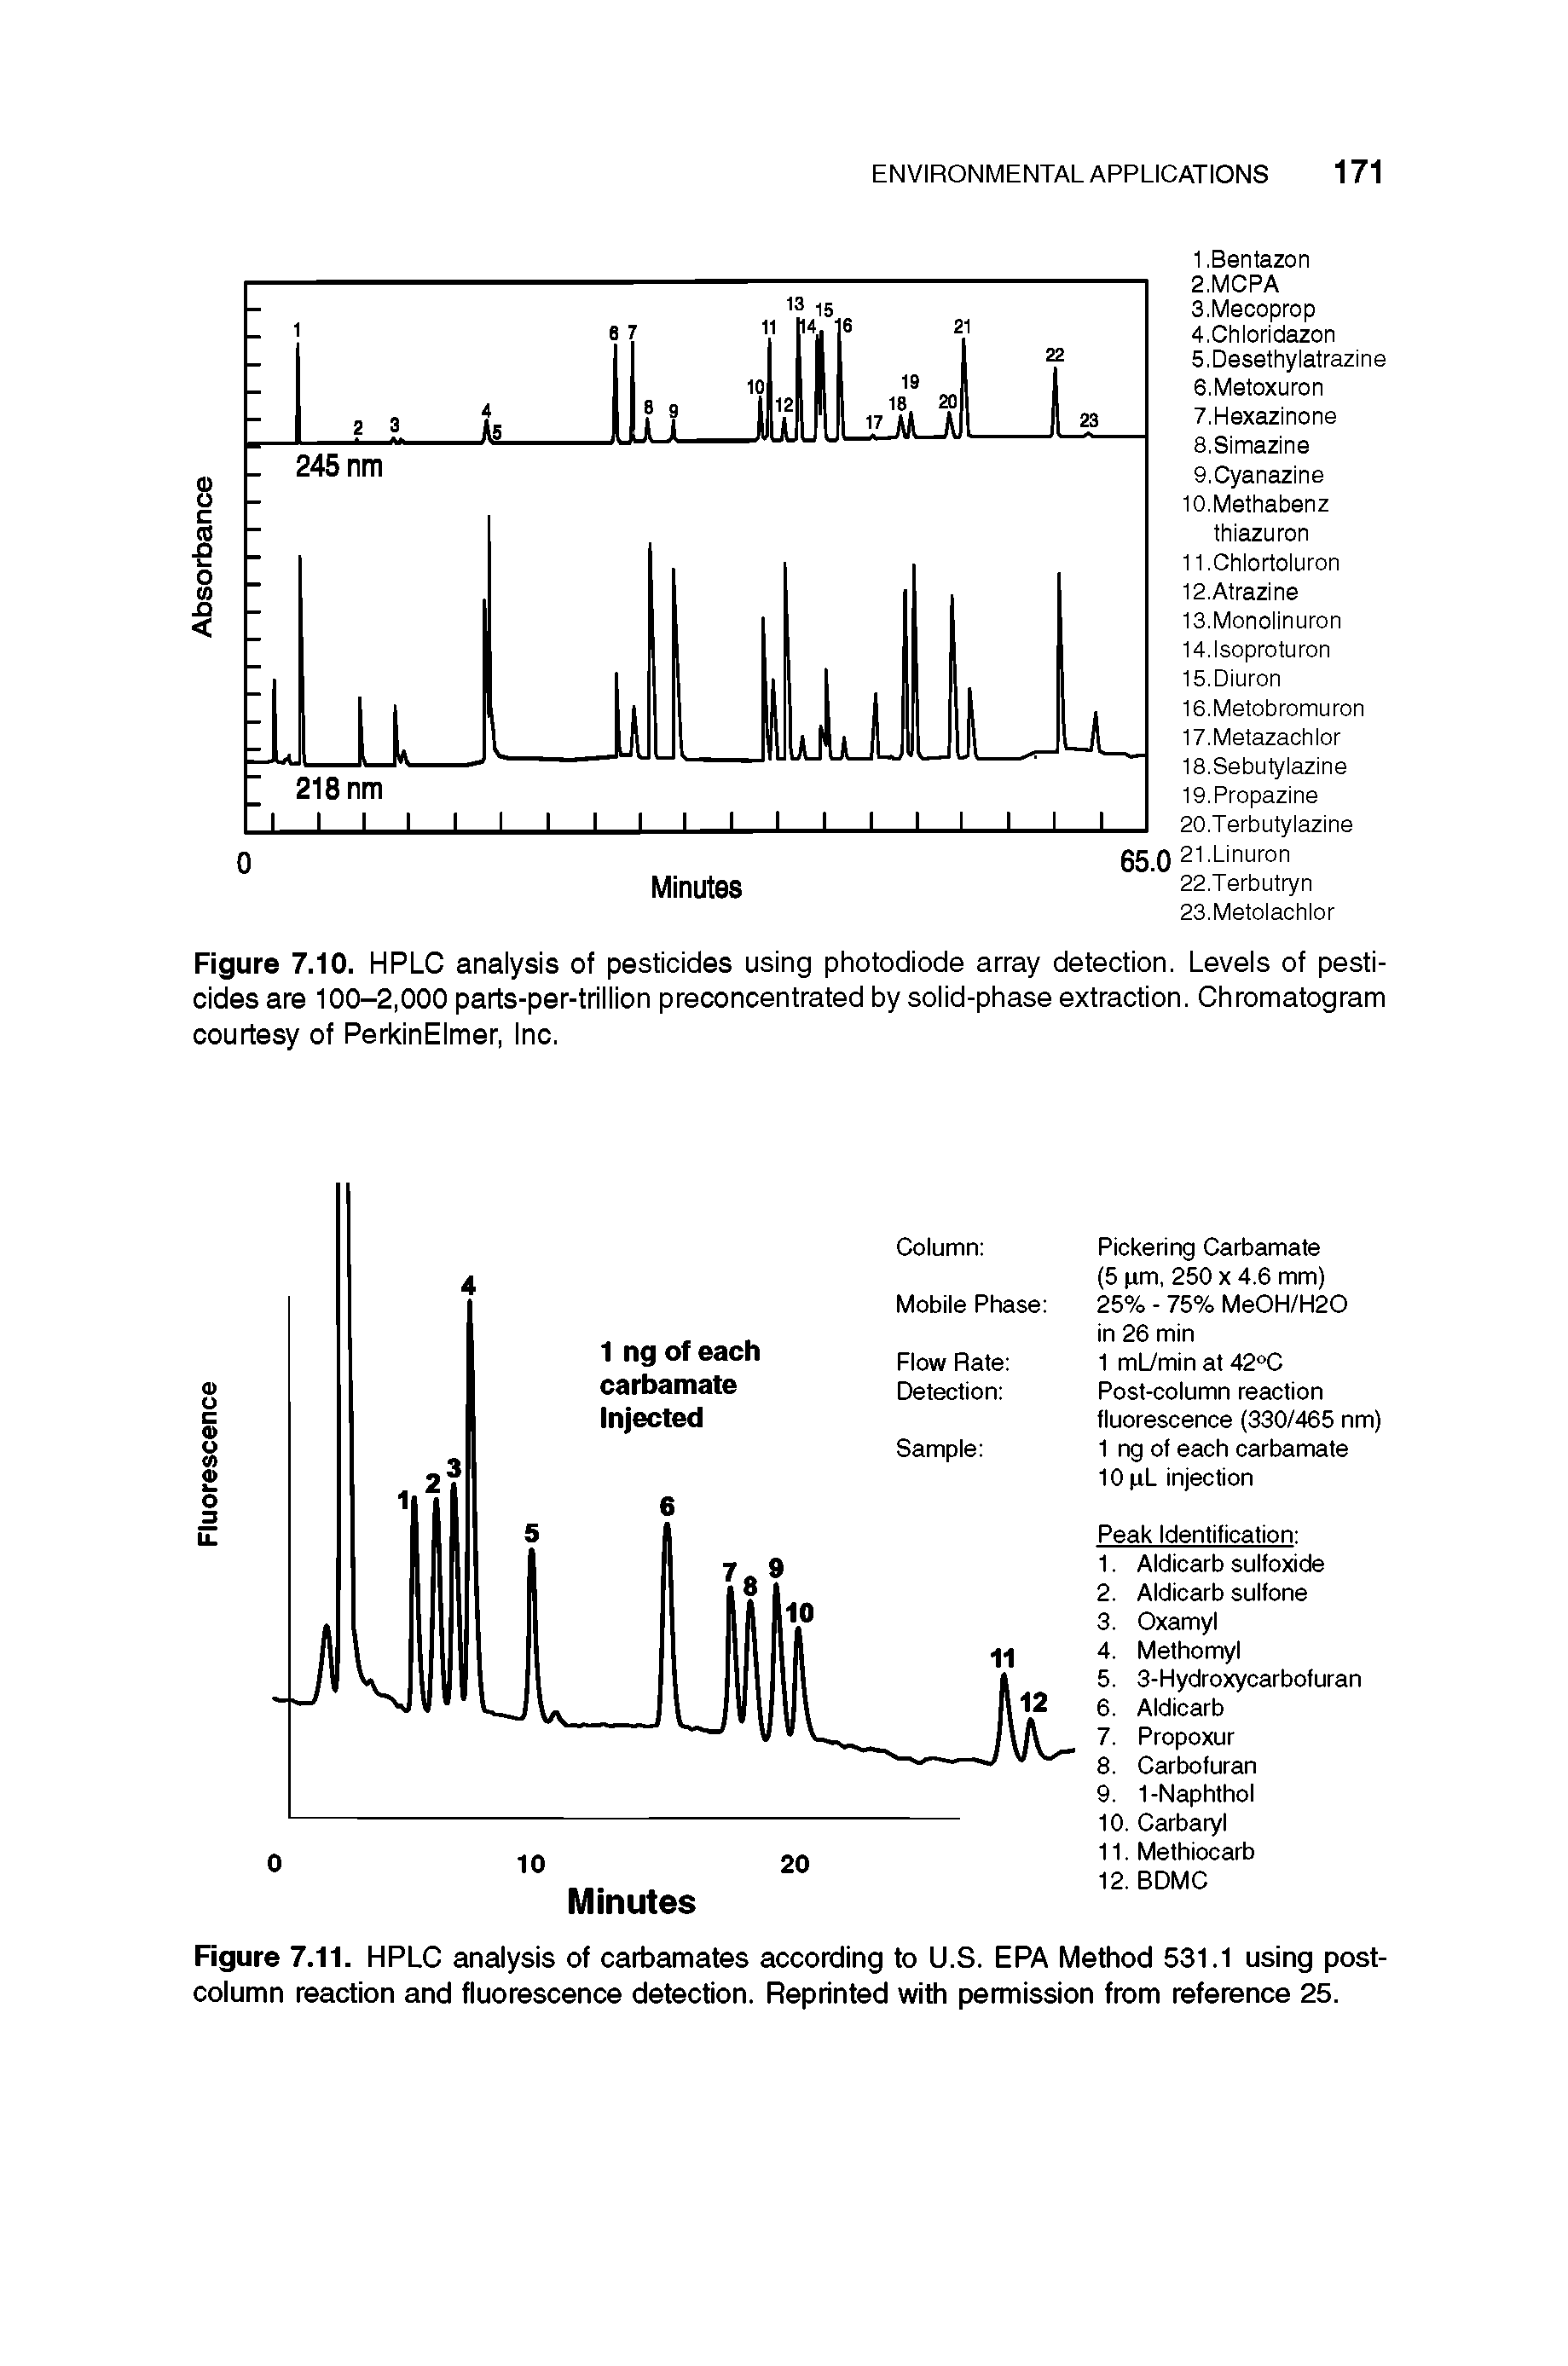 Figure 7.11. HPLC analysis of carbamates according to U.S. EPA Method 531.1 using postcolumn reaction and fluorescence detection. Reprinted with permission from reference 25.